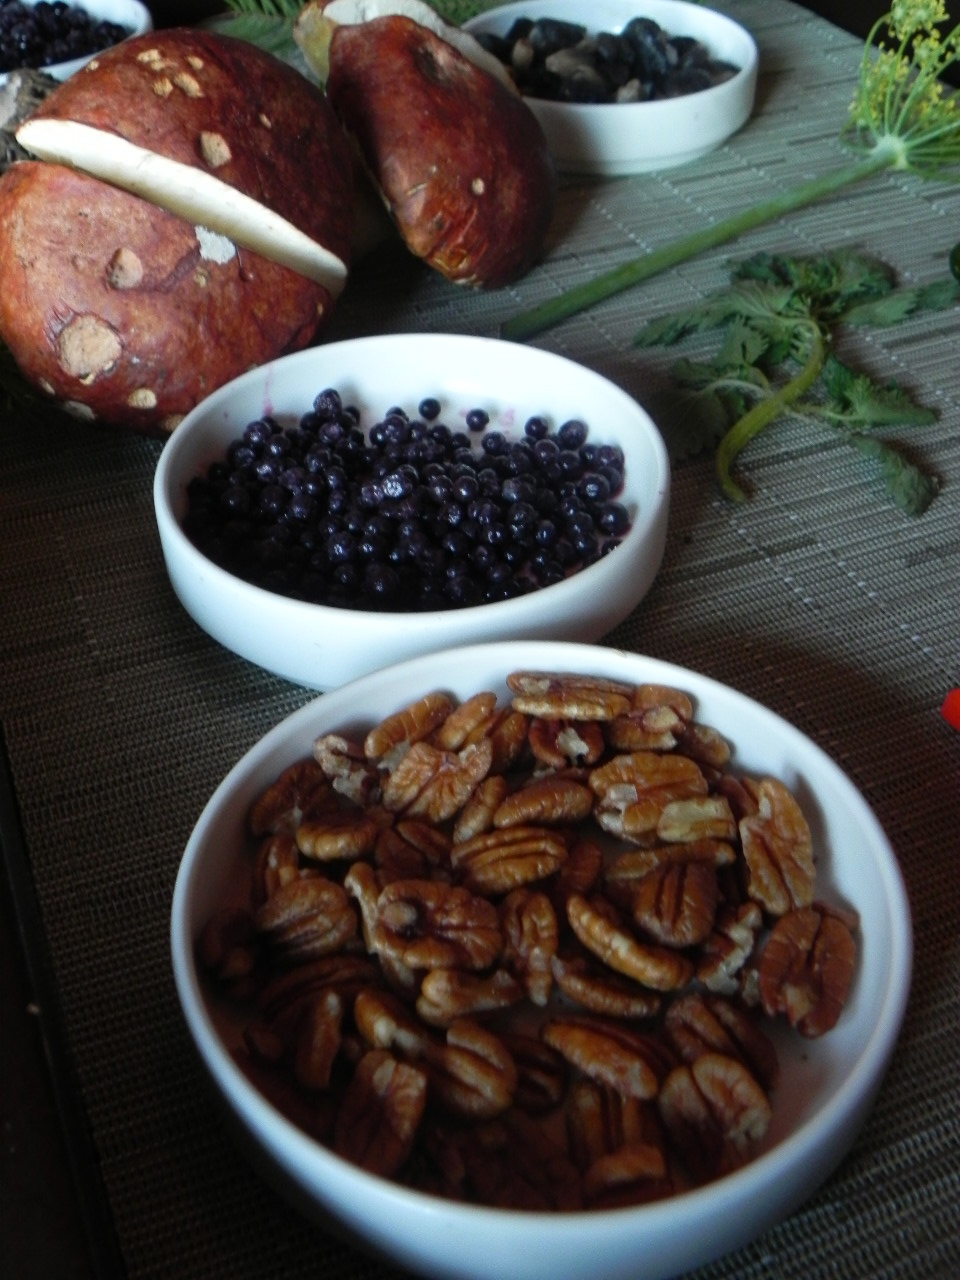 A display of the various edibles Stewart found in the Sierra Nevada. From bottom to top: a bowl of wild pecans, elderberries, Sierra porcinis and huitlacoche which he describes as corn infected with fungus.